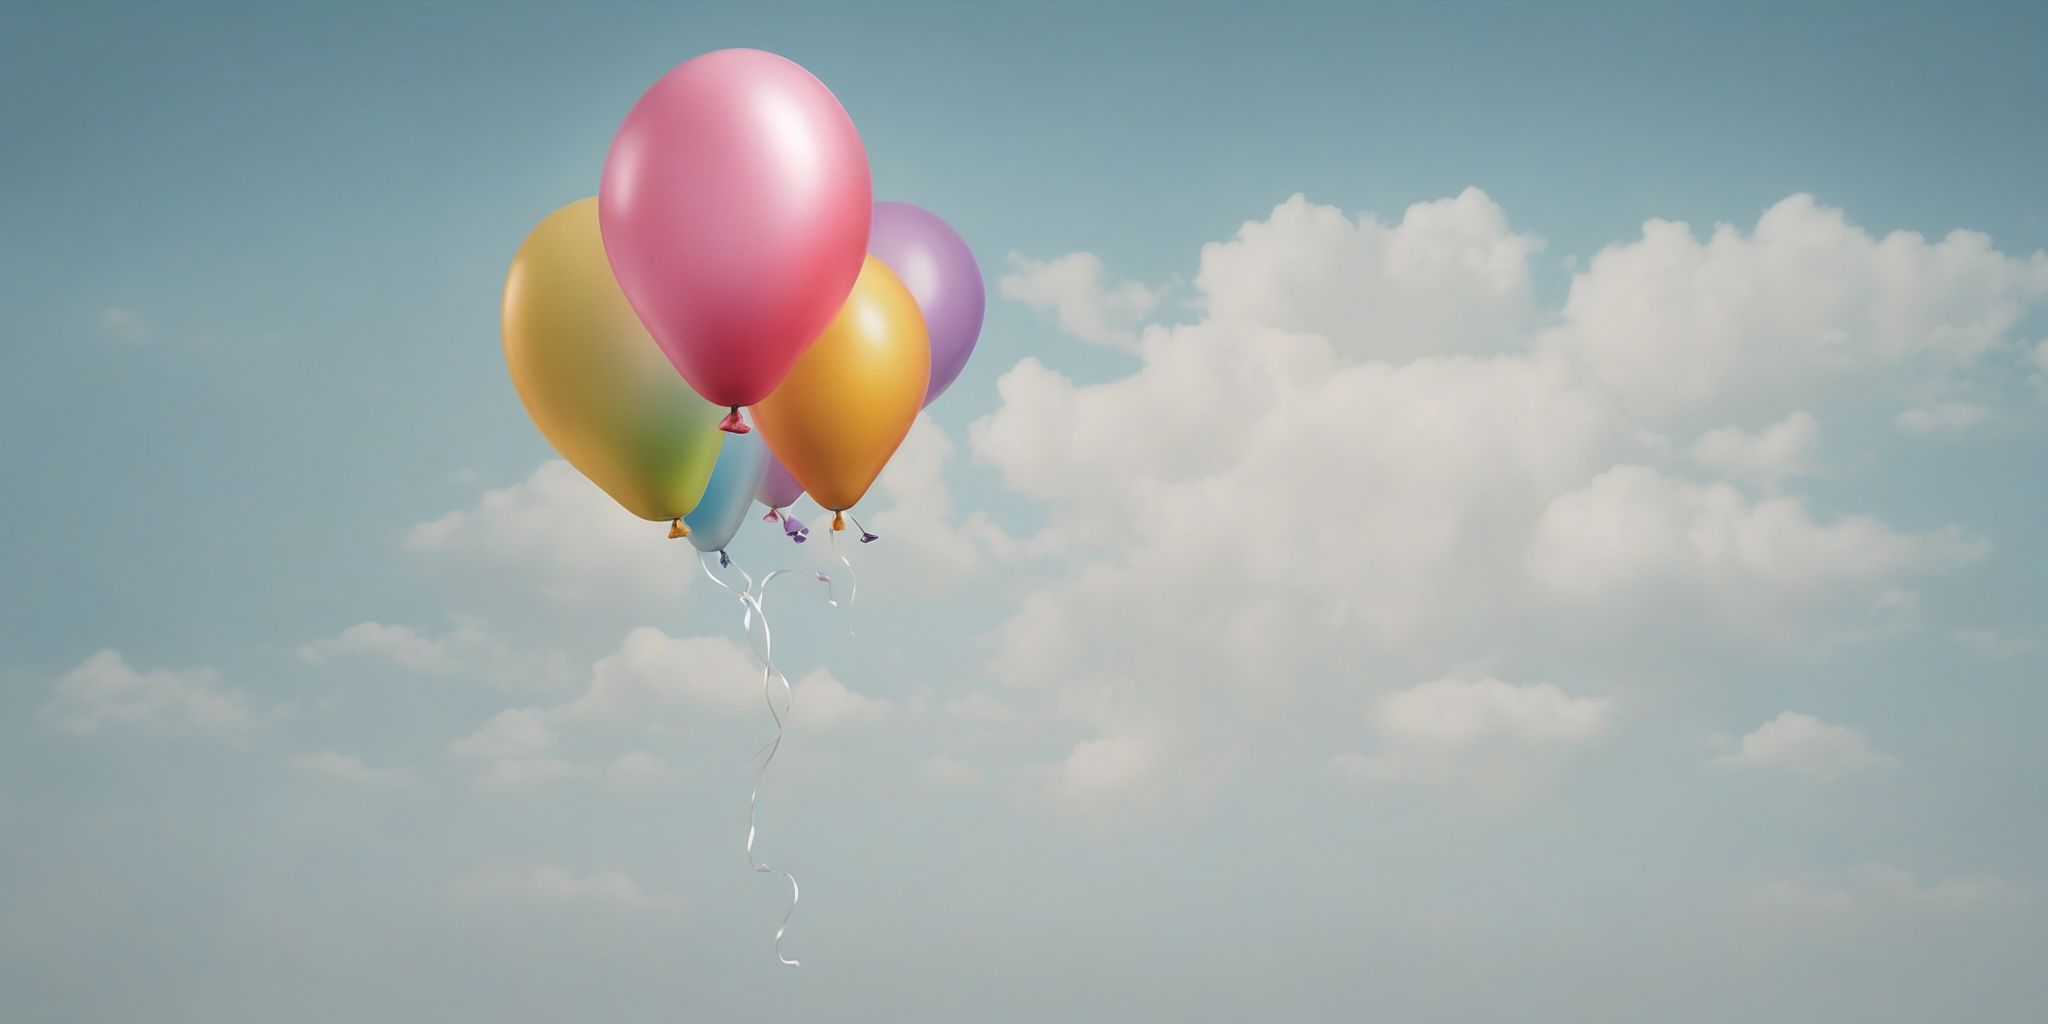 Floating balloon  in realistic, photographic style